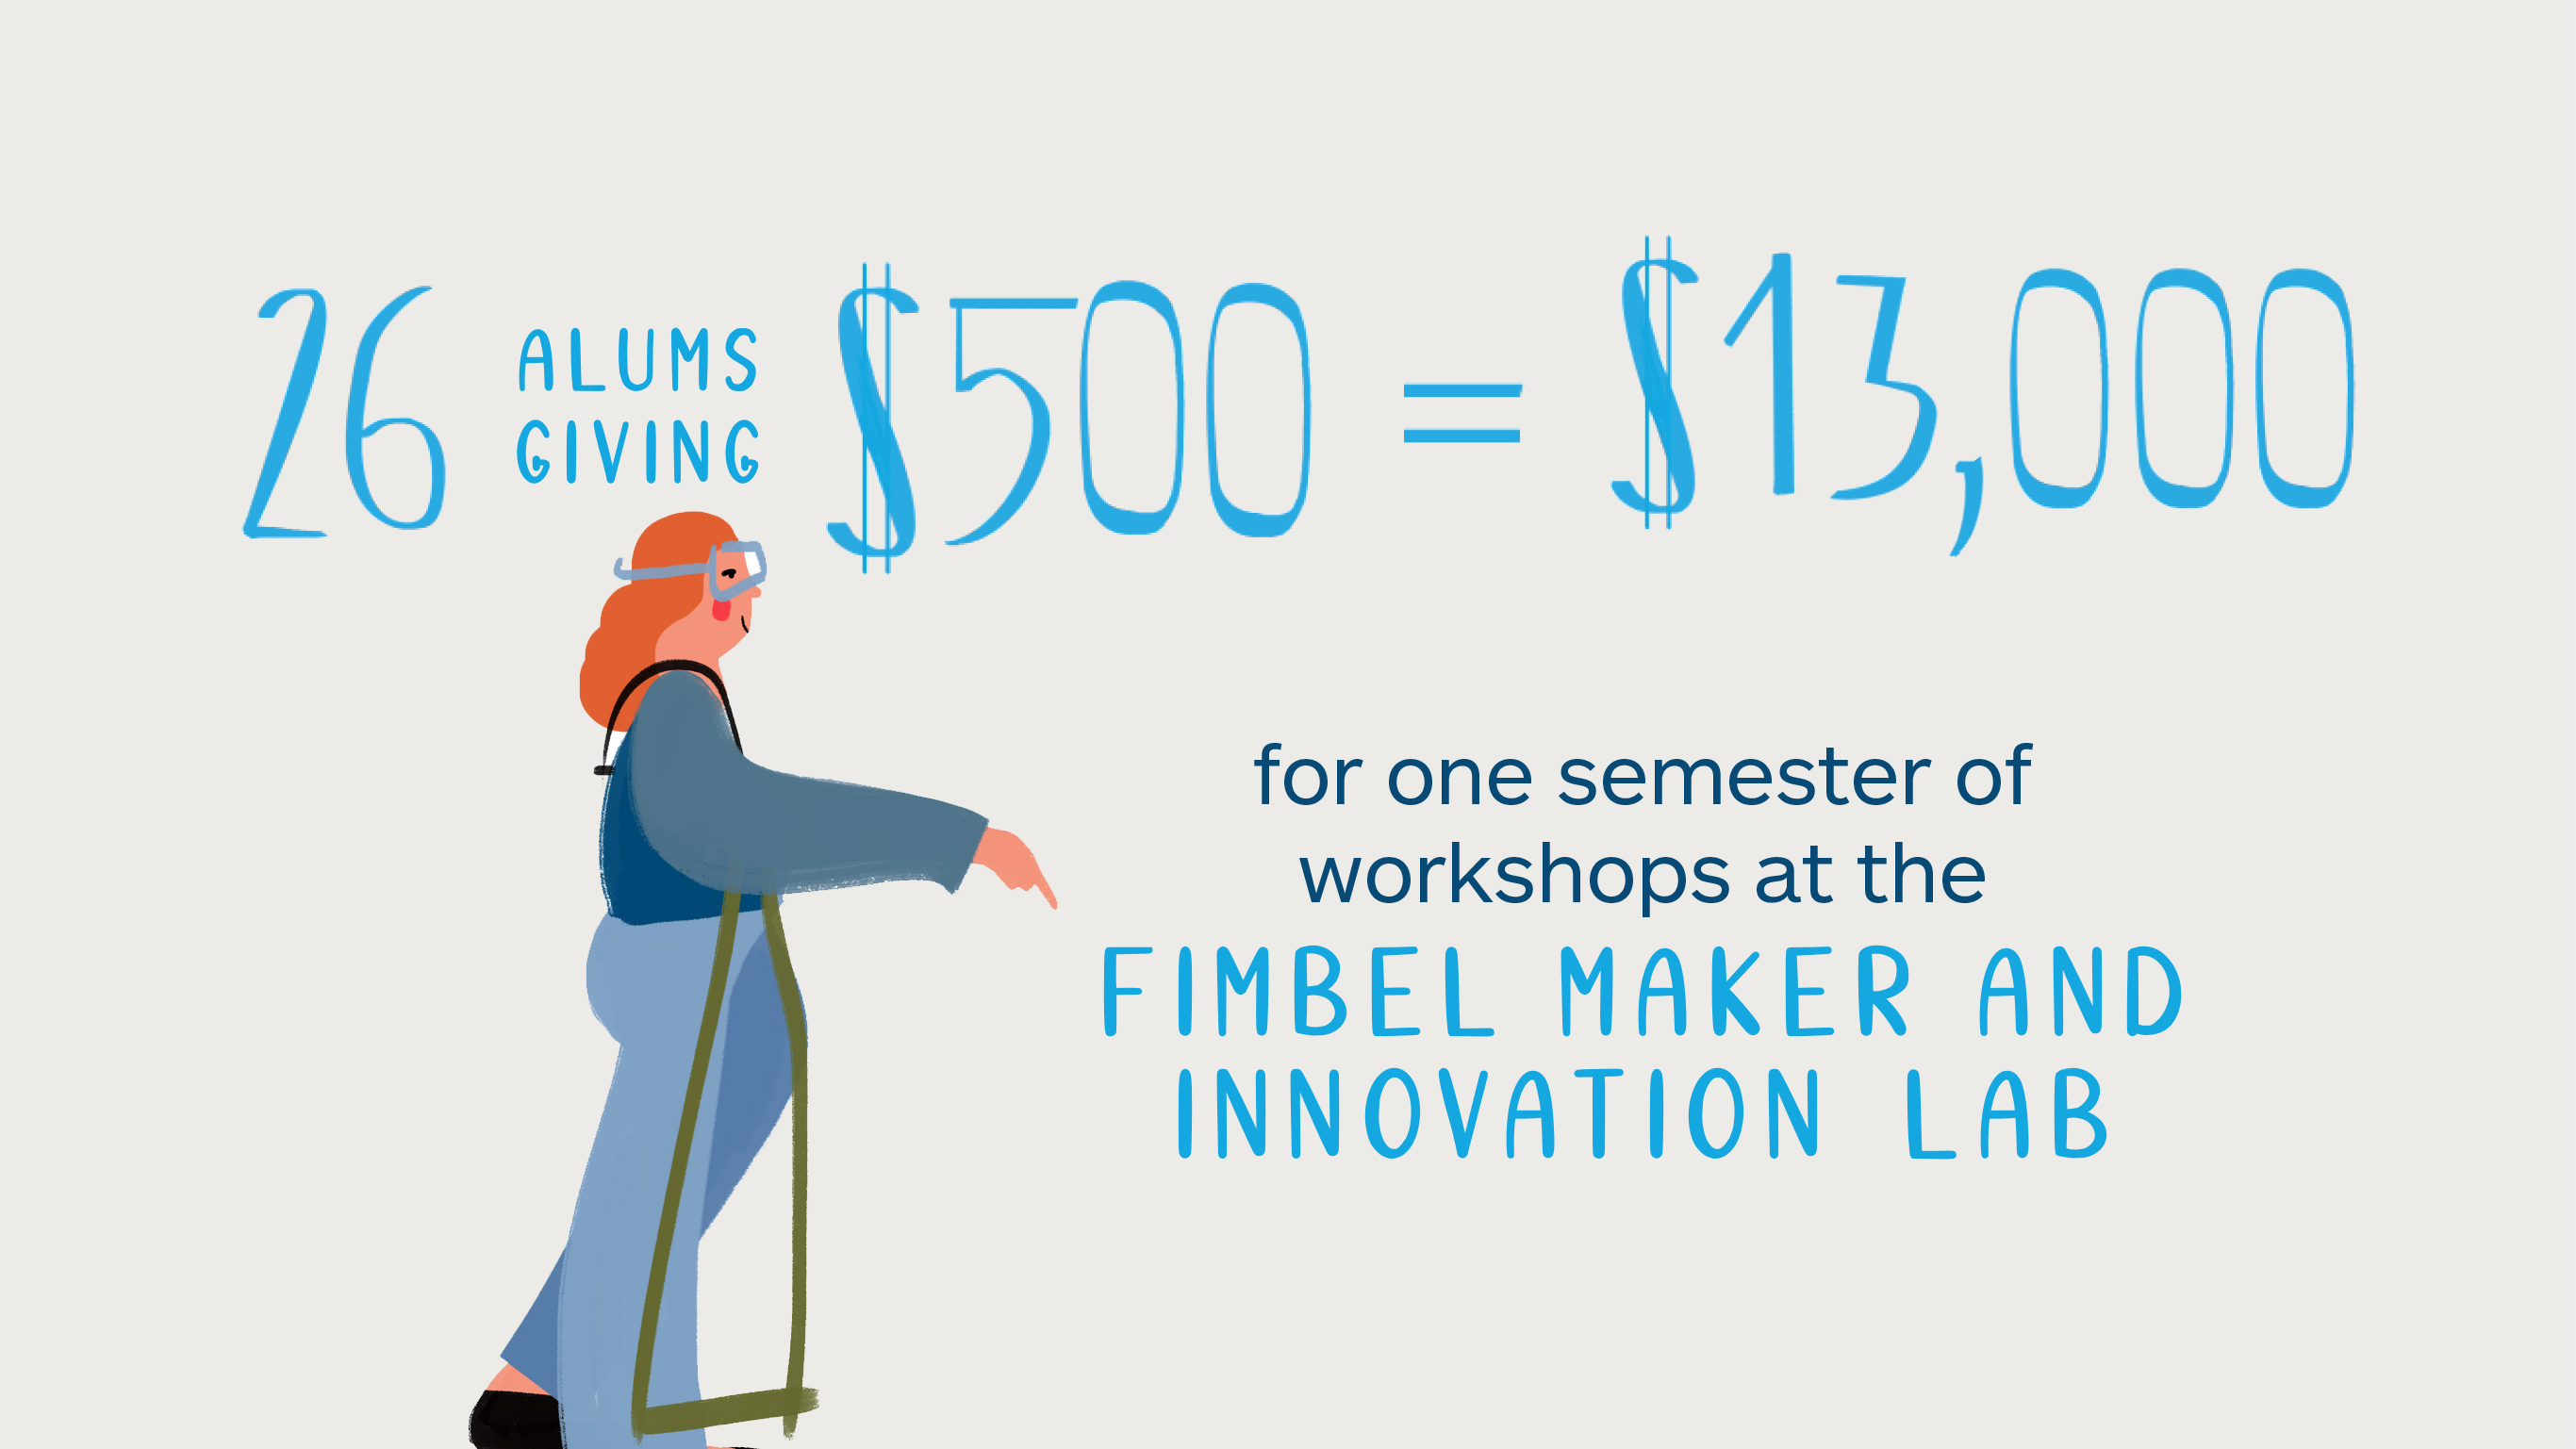 26 alums giving $500 = $13,000 for one semester of workshops at the Fimbel Maker and Innovation Lab